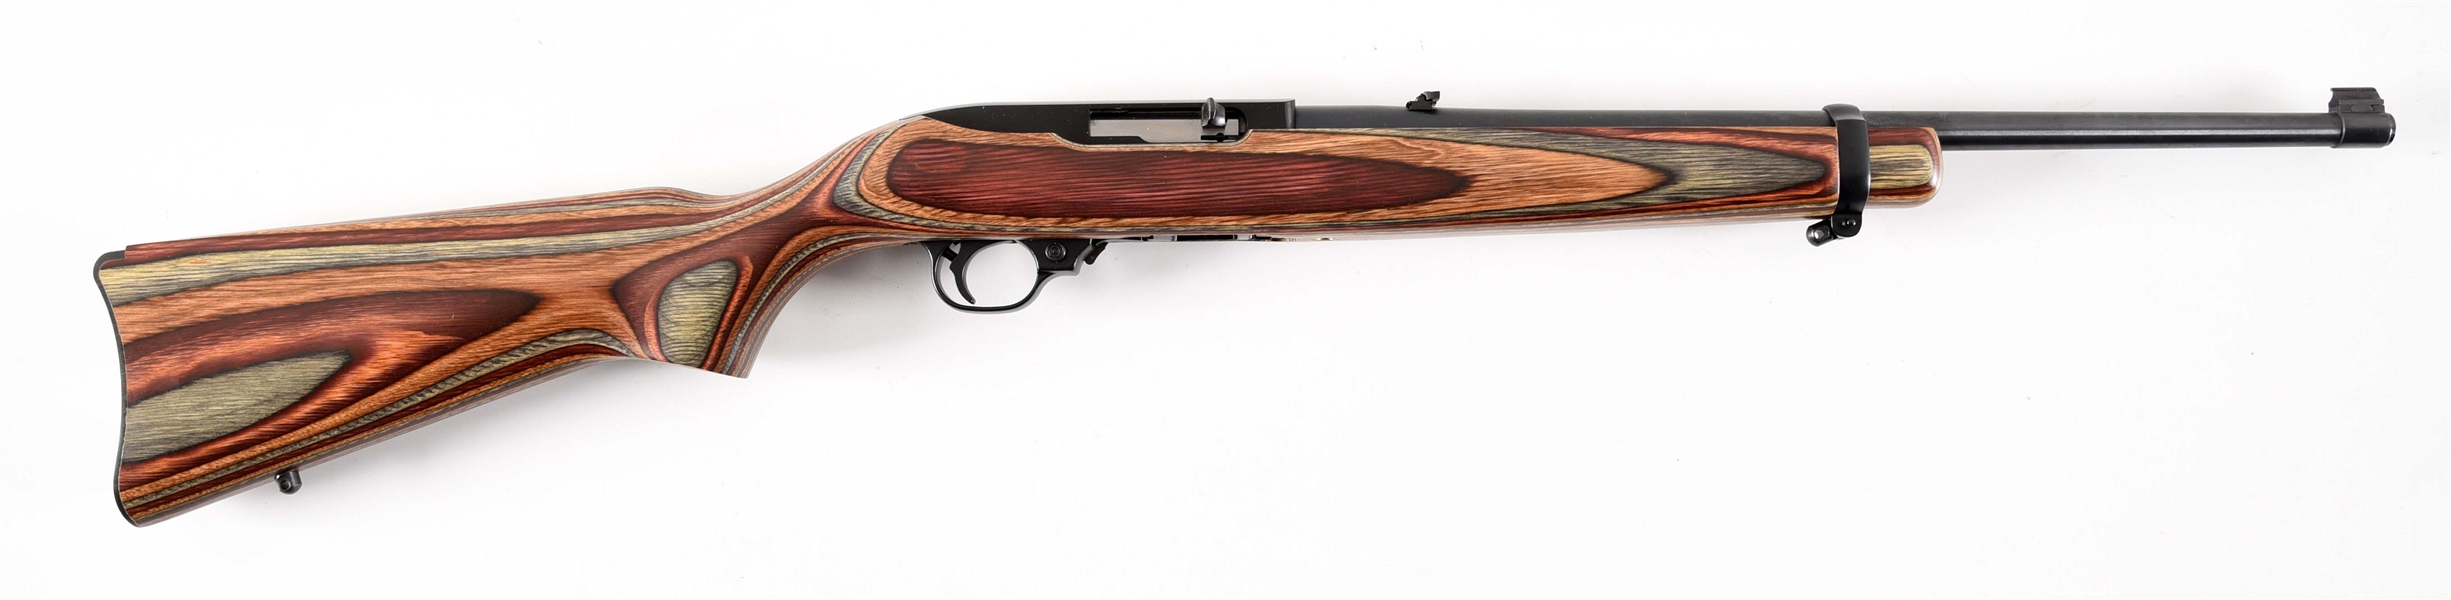 (M) RUGER MODEL 10/22 SEMI-AUTOMATIC RIFLE 